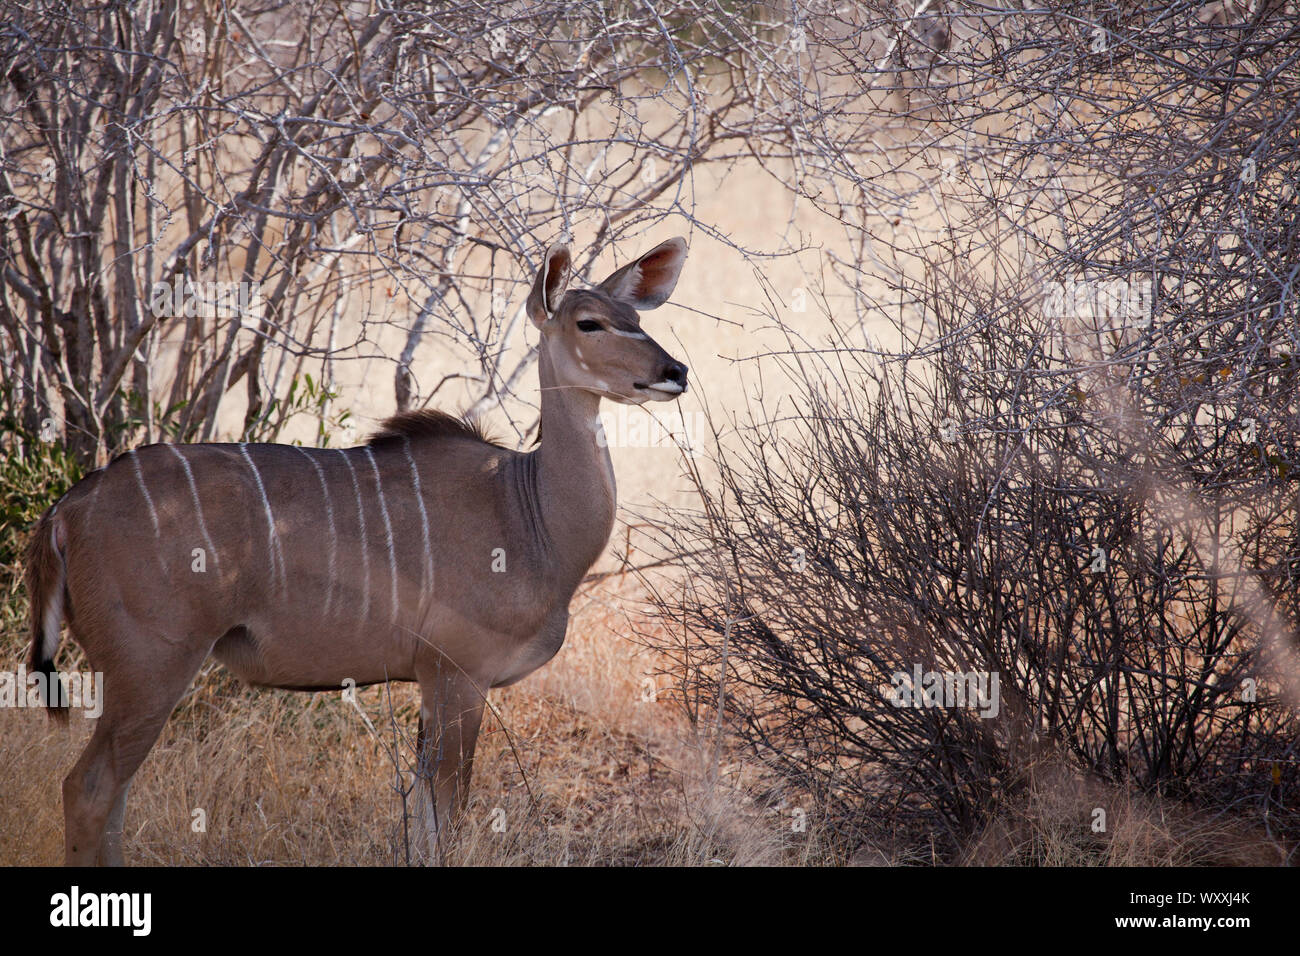 Female (no horns or throat mane) greater kudu in the shade of thorn bsuhes, Ruaha National Park Stock Photo